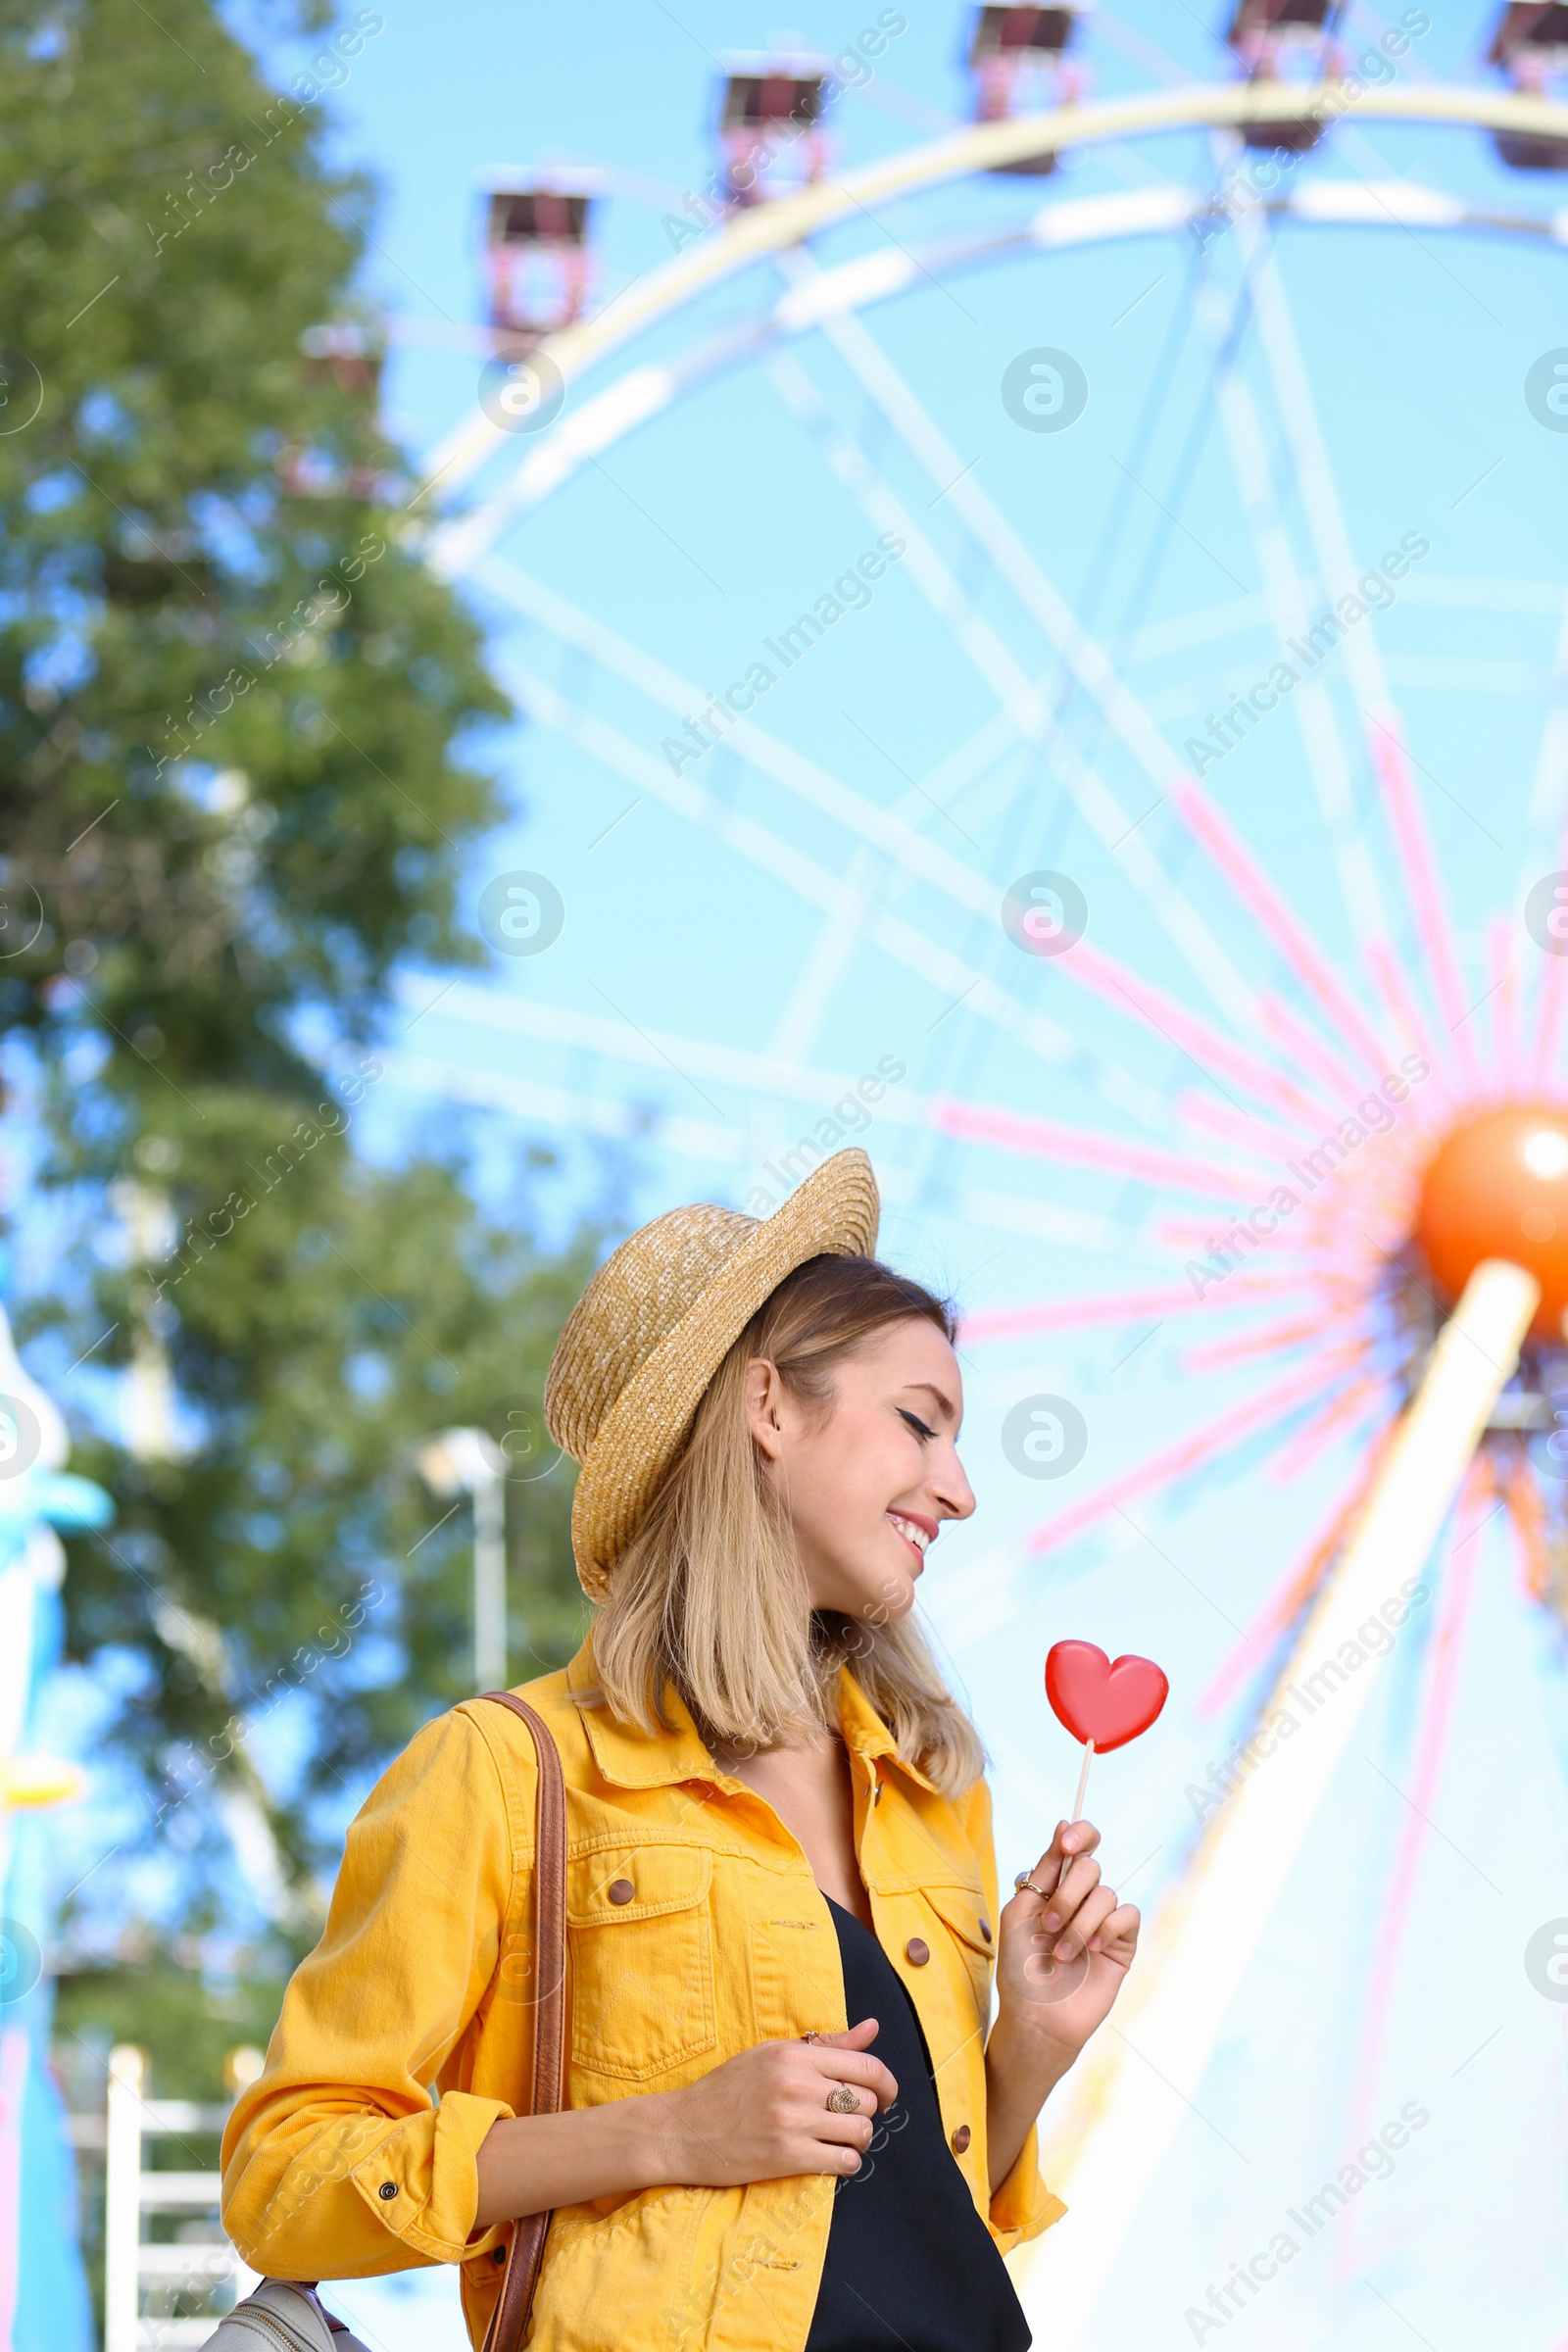 Photo of Beautiful woman with candy having fun at amusement park